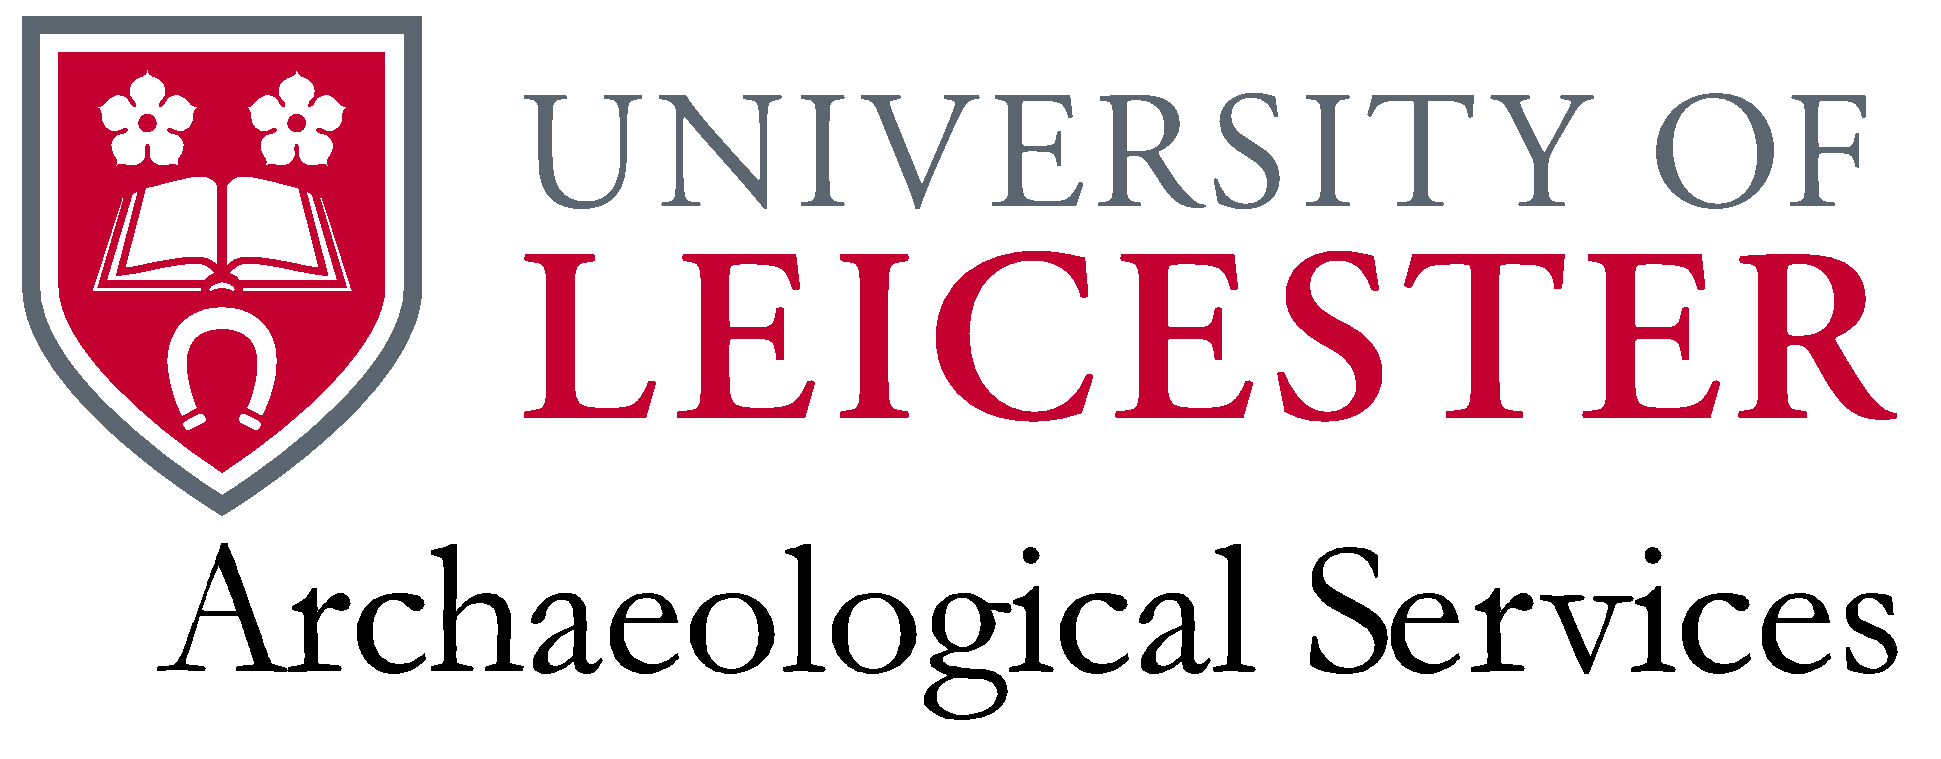 The logo of University of Leicester Archaeological Services.